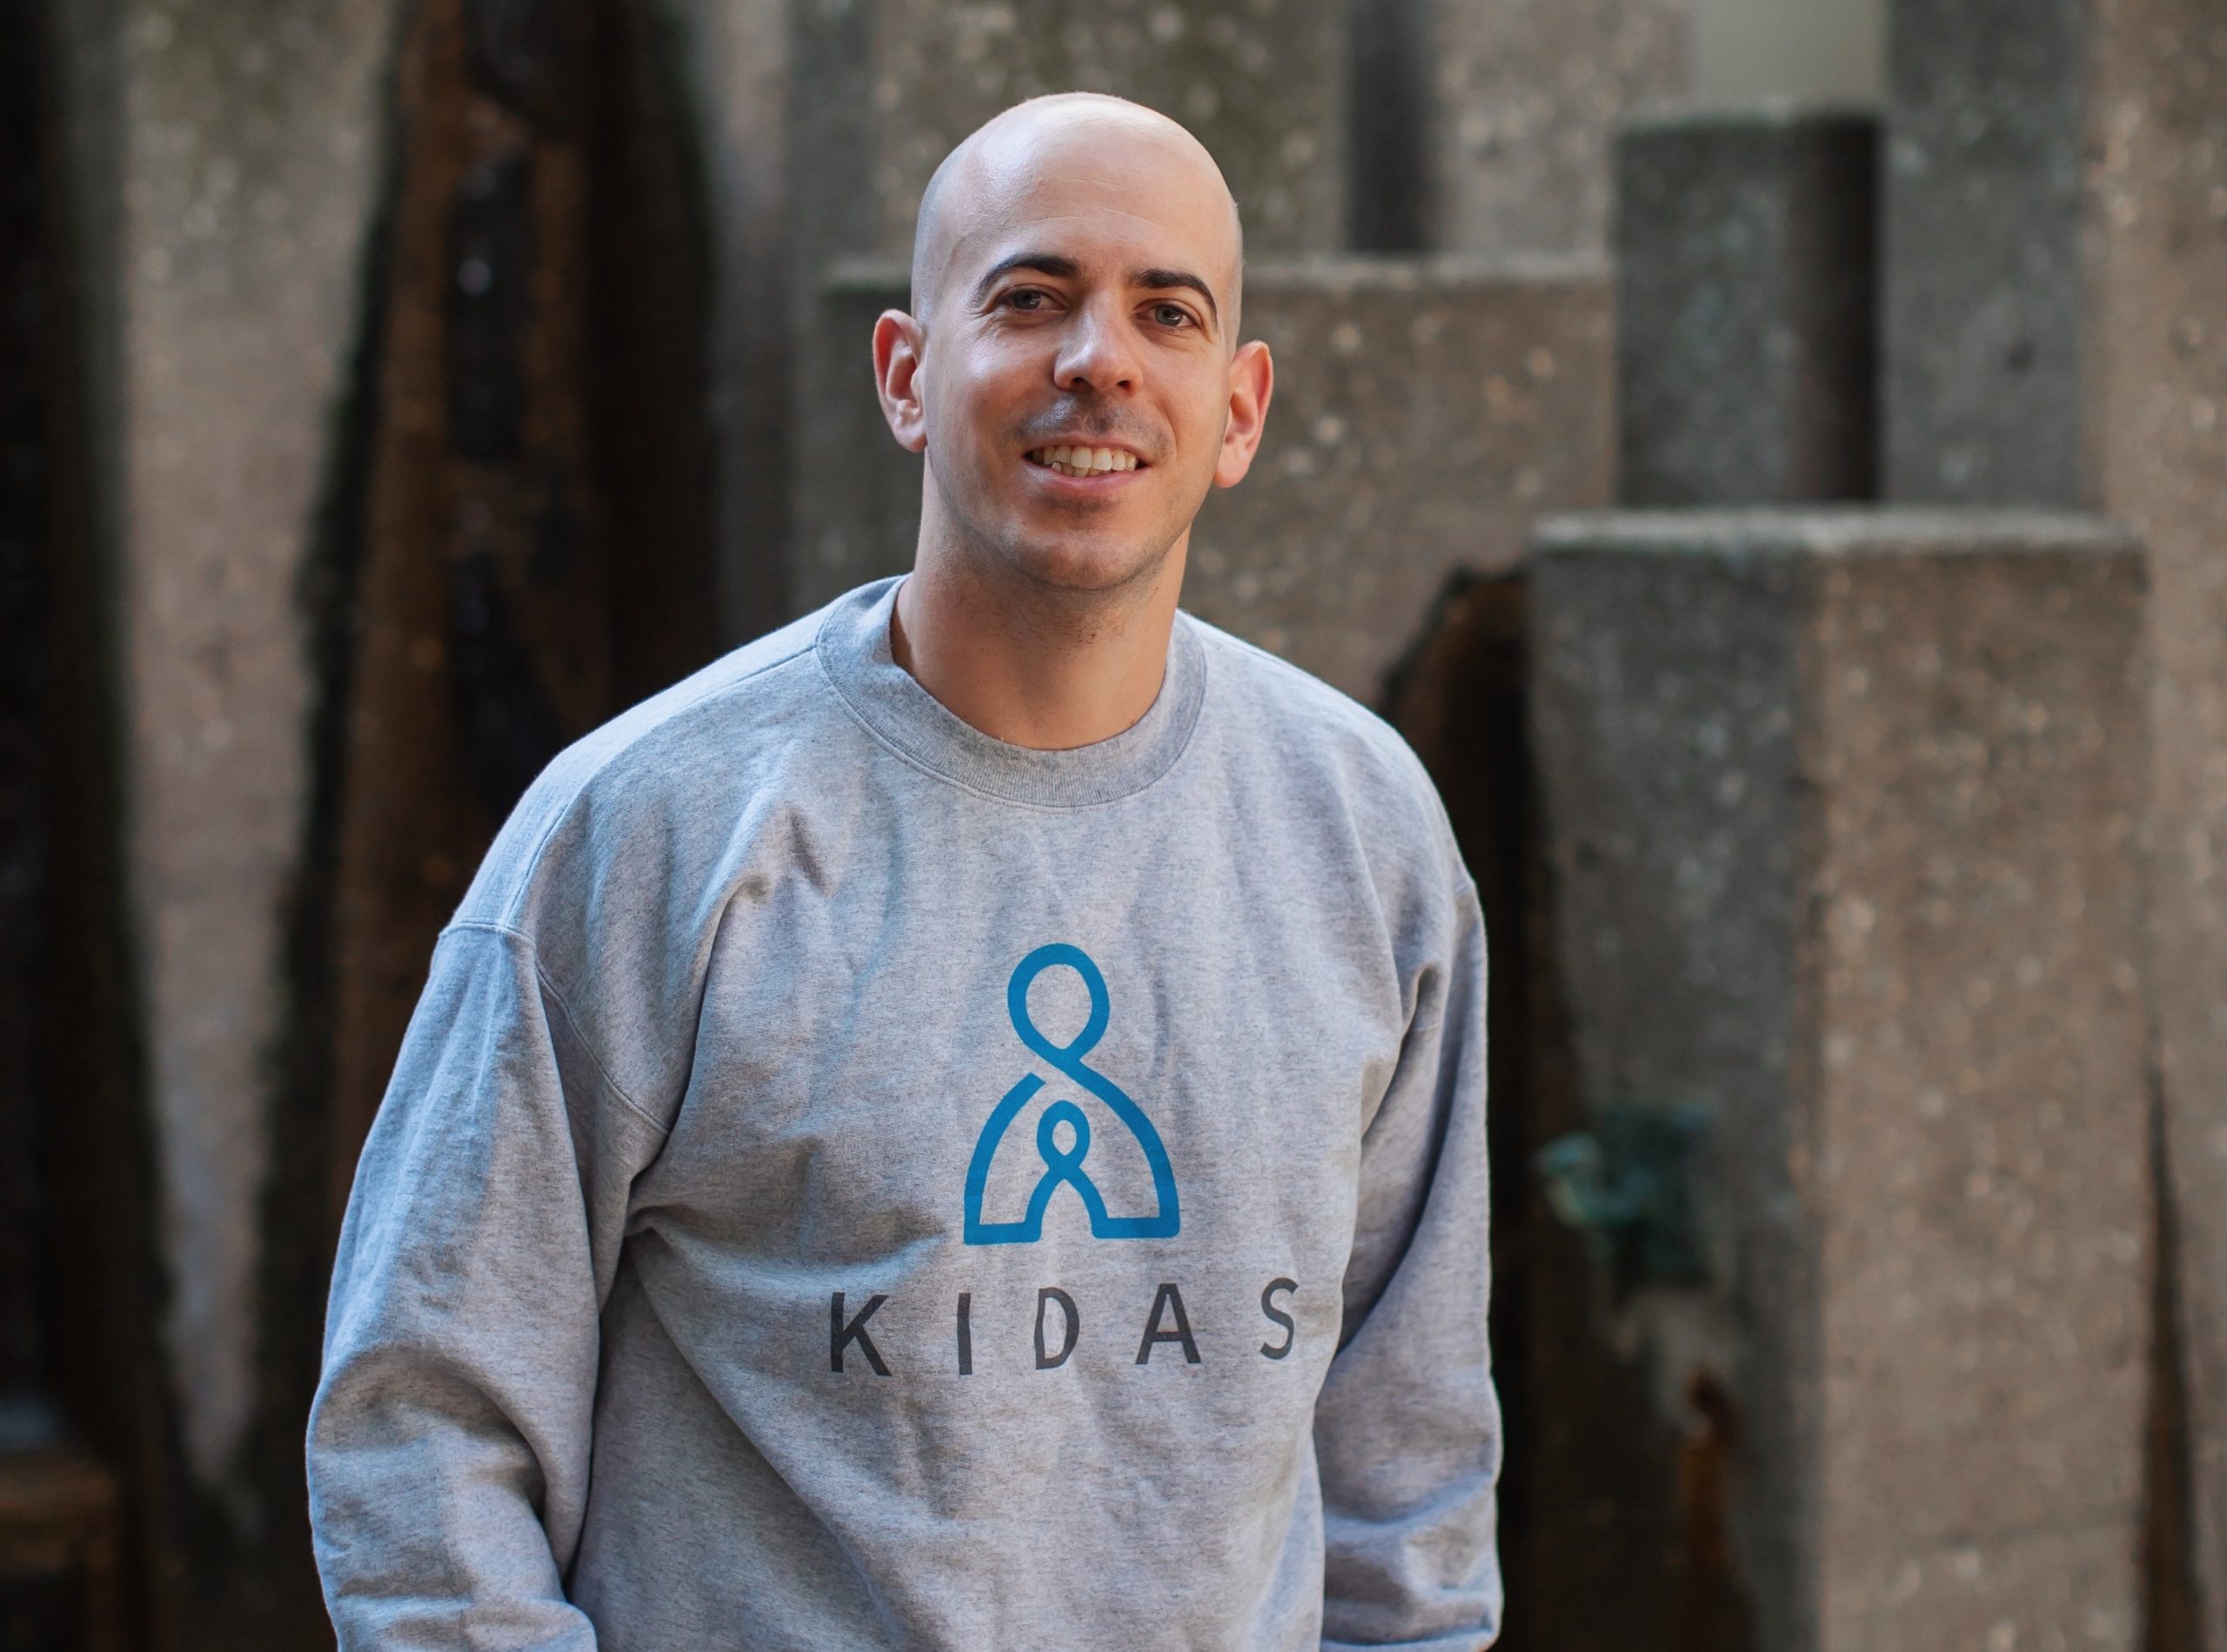 Ron Kerbs, founder and CEO of Kidas